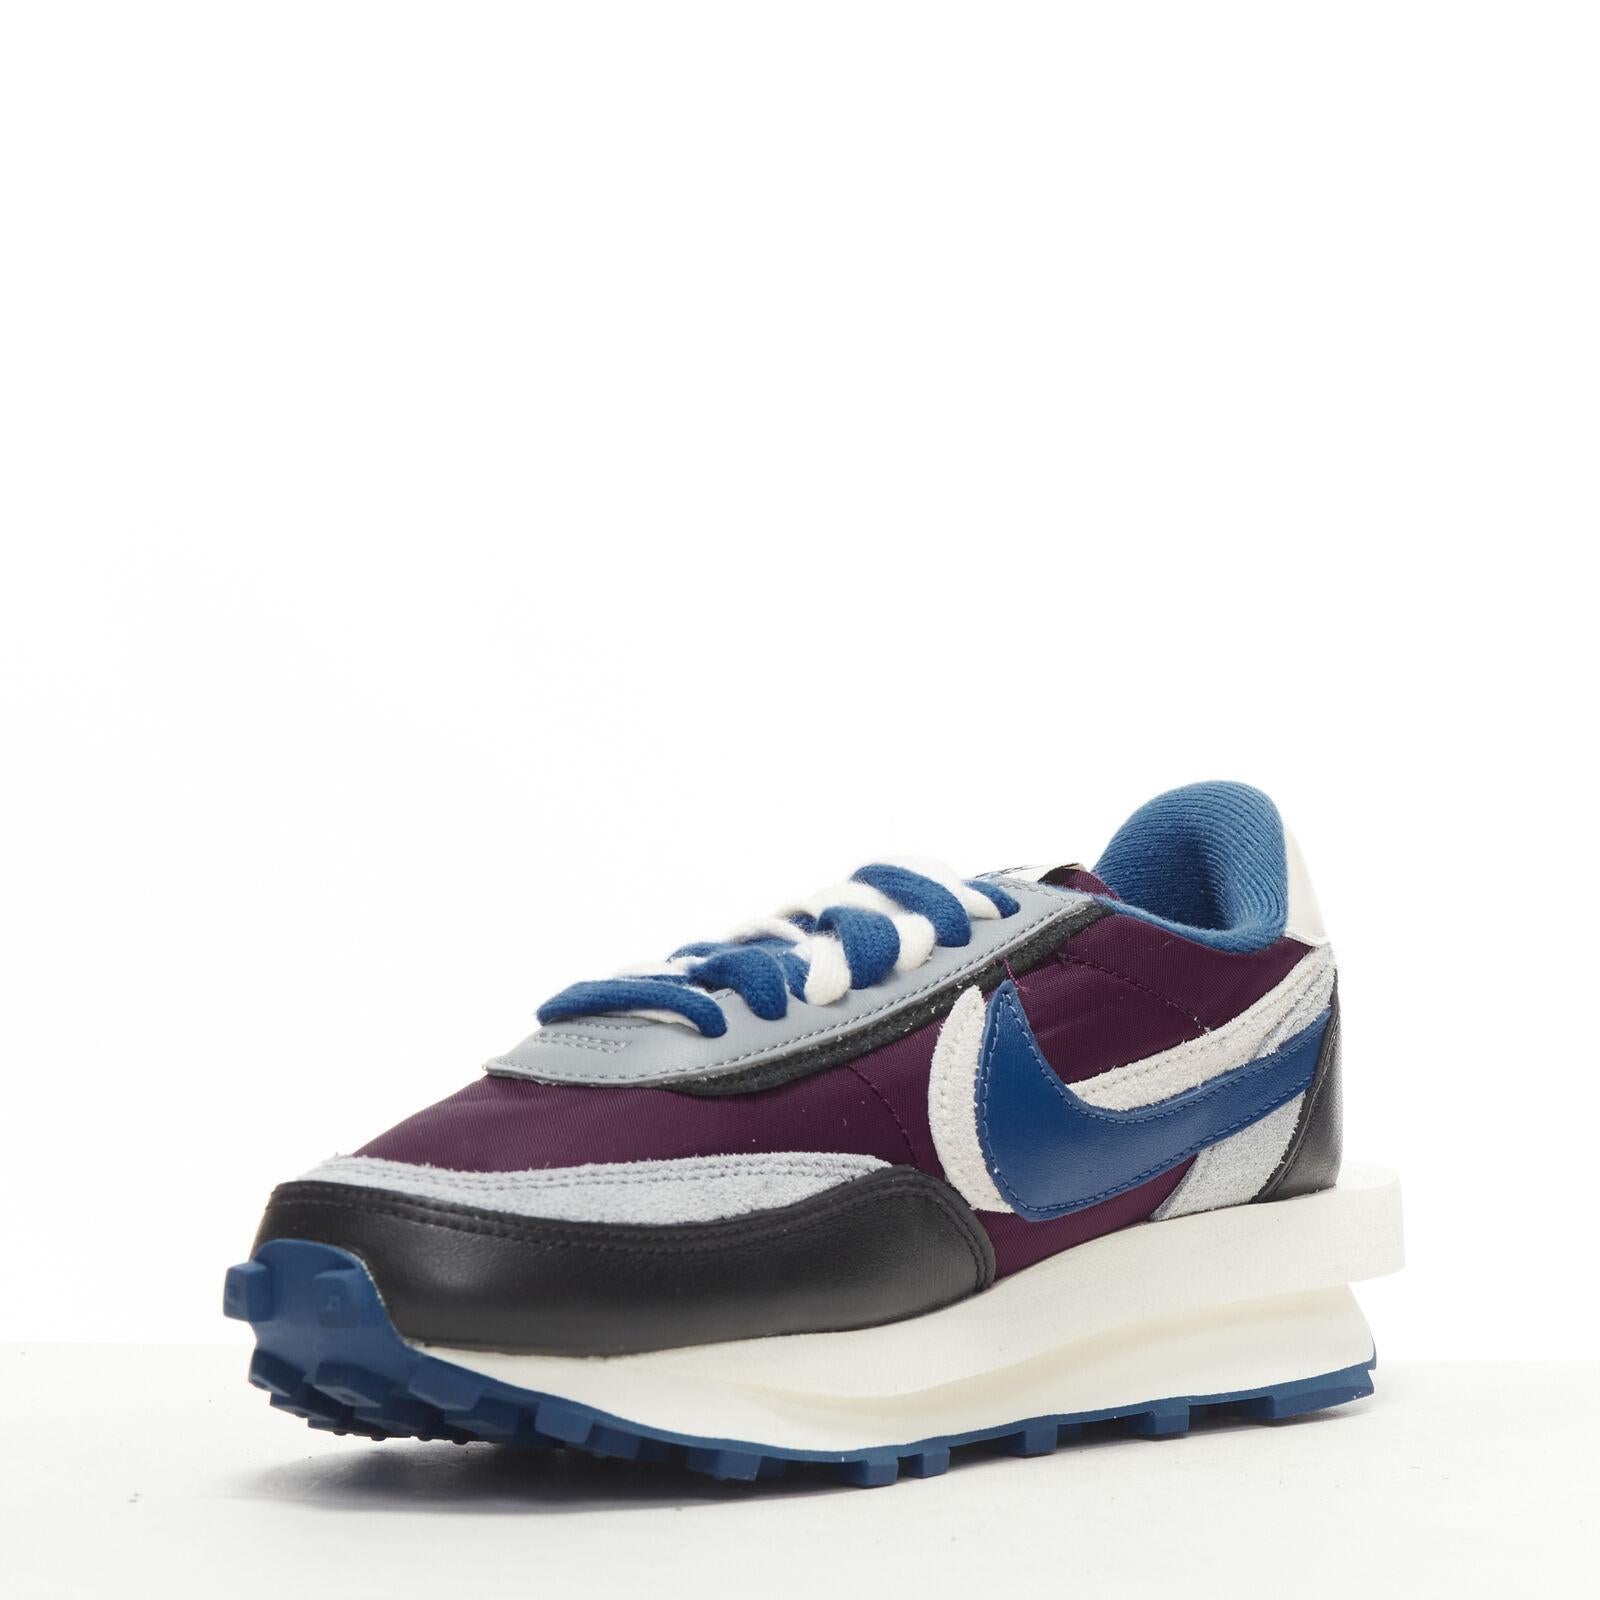 NIKE SACAI UNDERCOVER LD Waffle DJ4877 600 grey purple blue sneaker US5 EU37.5 In Excellent Condition For Sale In Hong Kong, NT